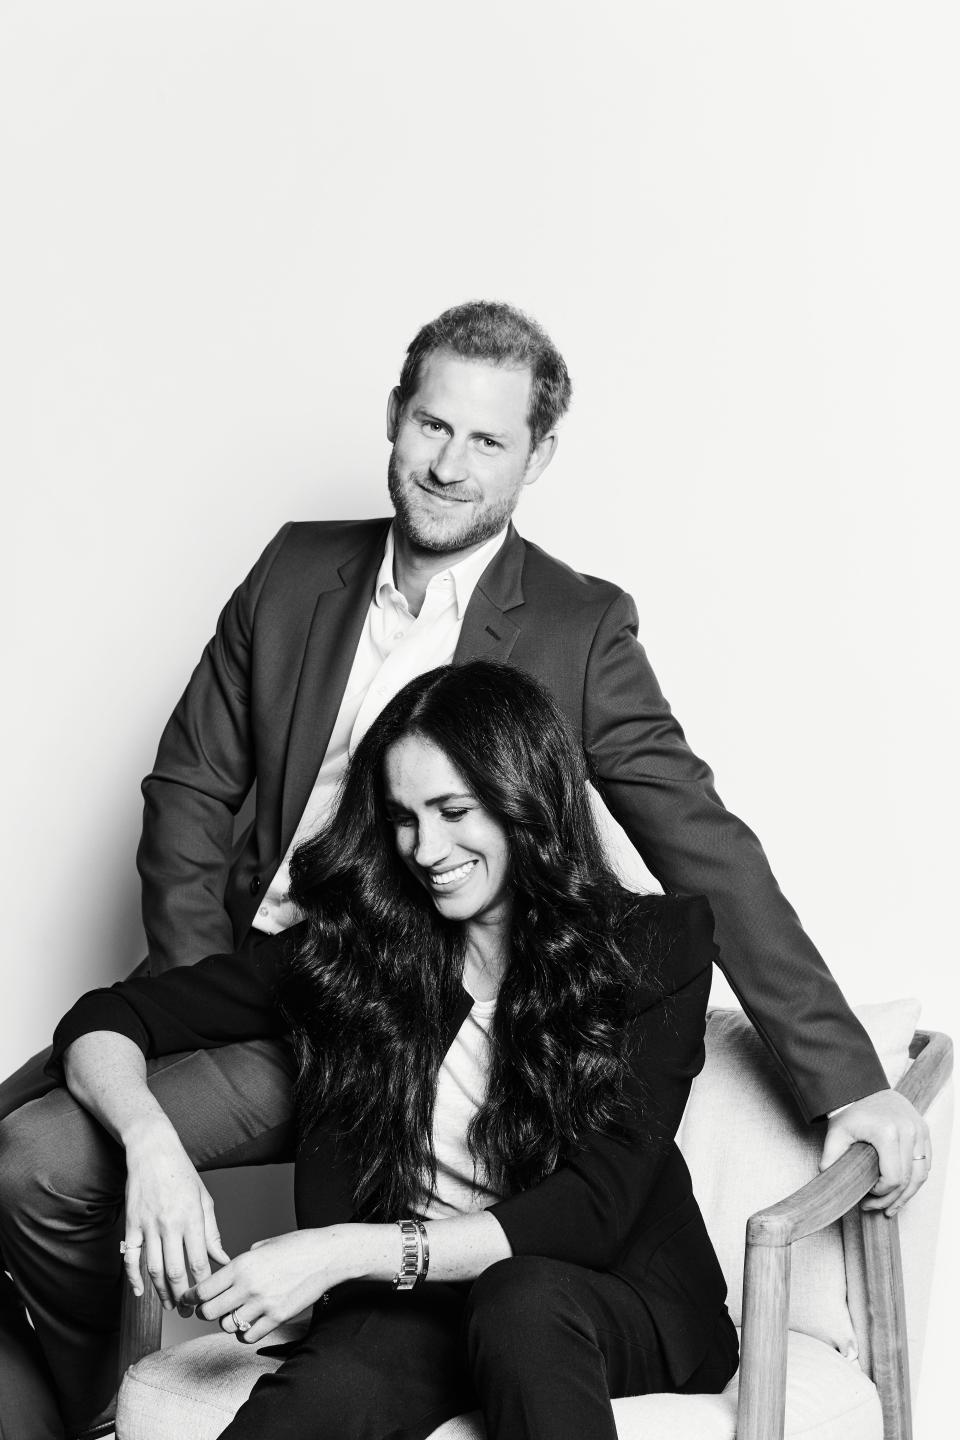 Prince Harry and Duchess Meghan of Sussex, in photo released in connection with TIME100 Talk appearance, Oct. 20, 2020.